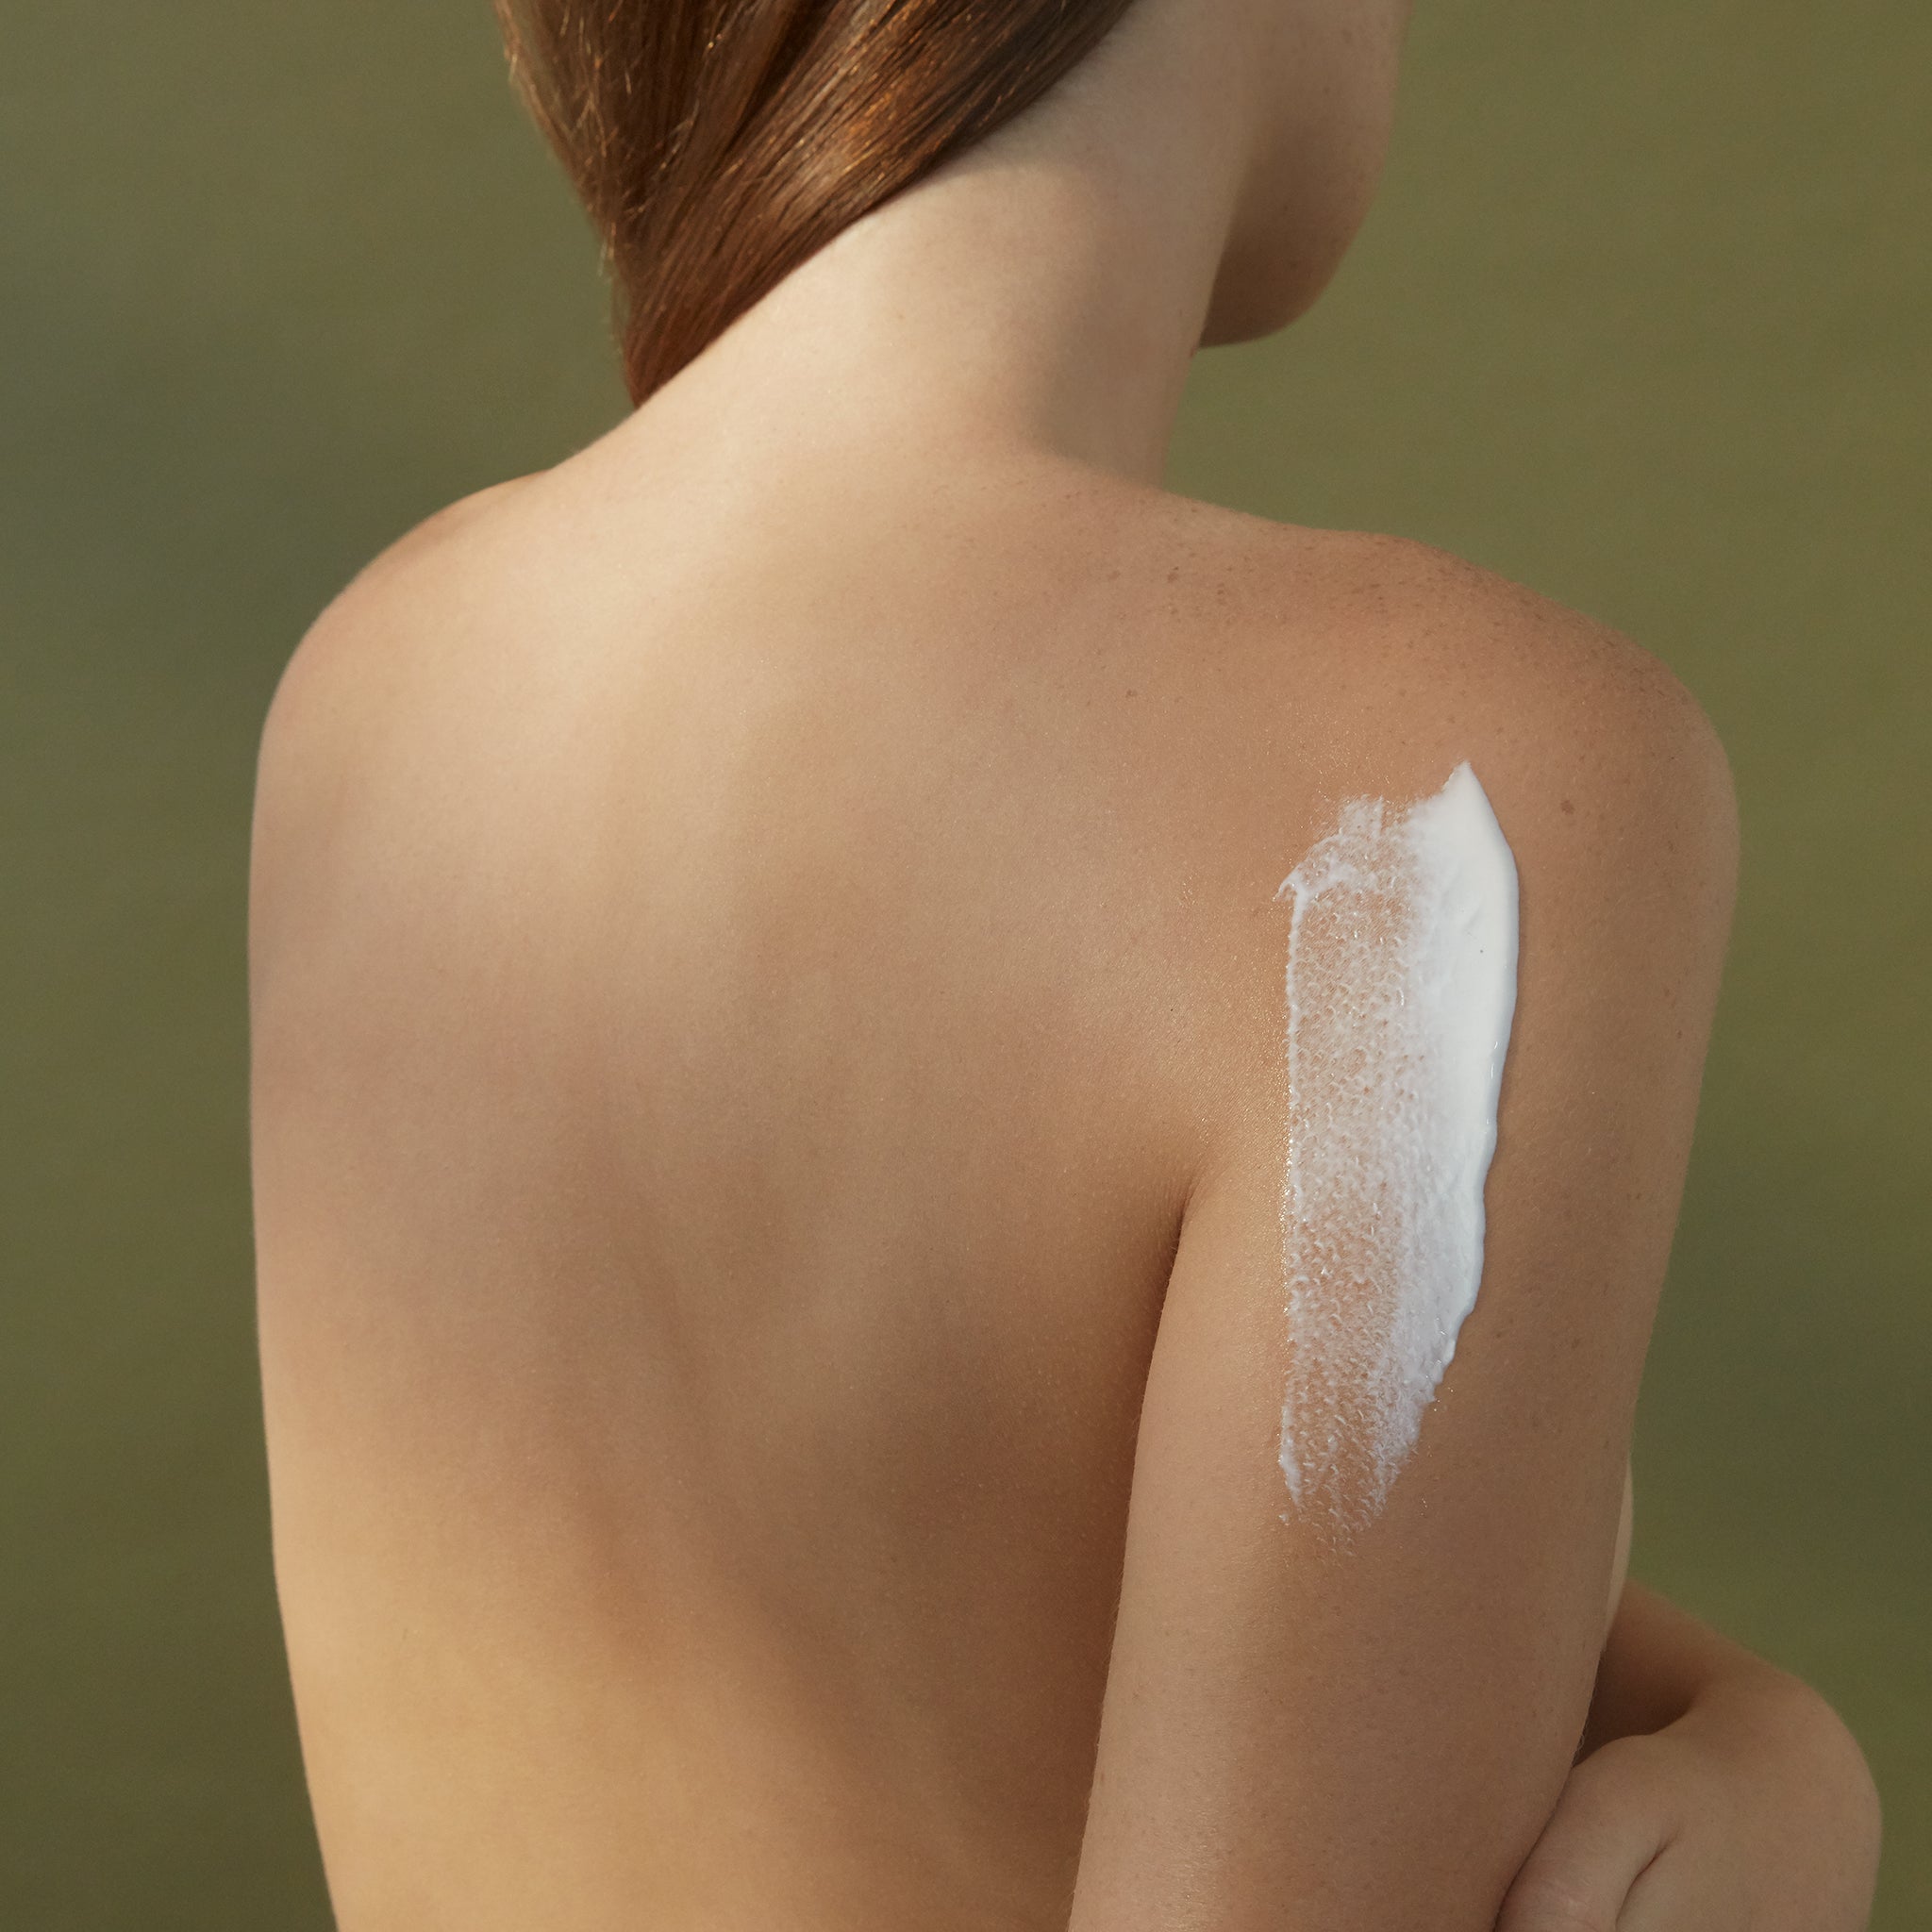 A woman's bare back with a smear of white cream on the back of her shoulder and arm